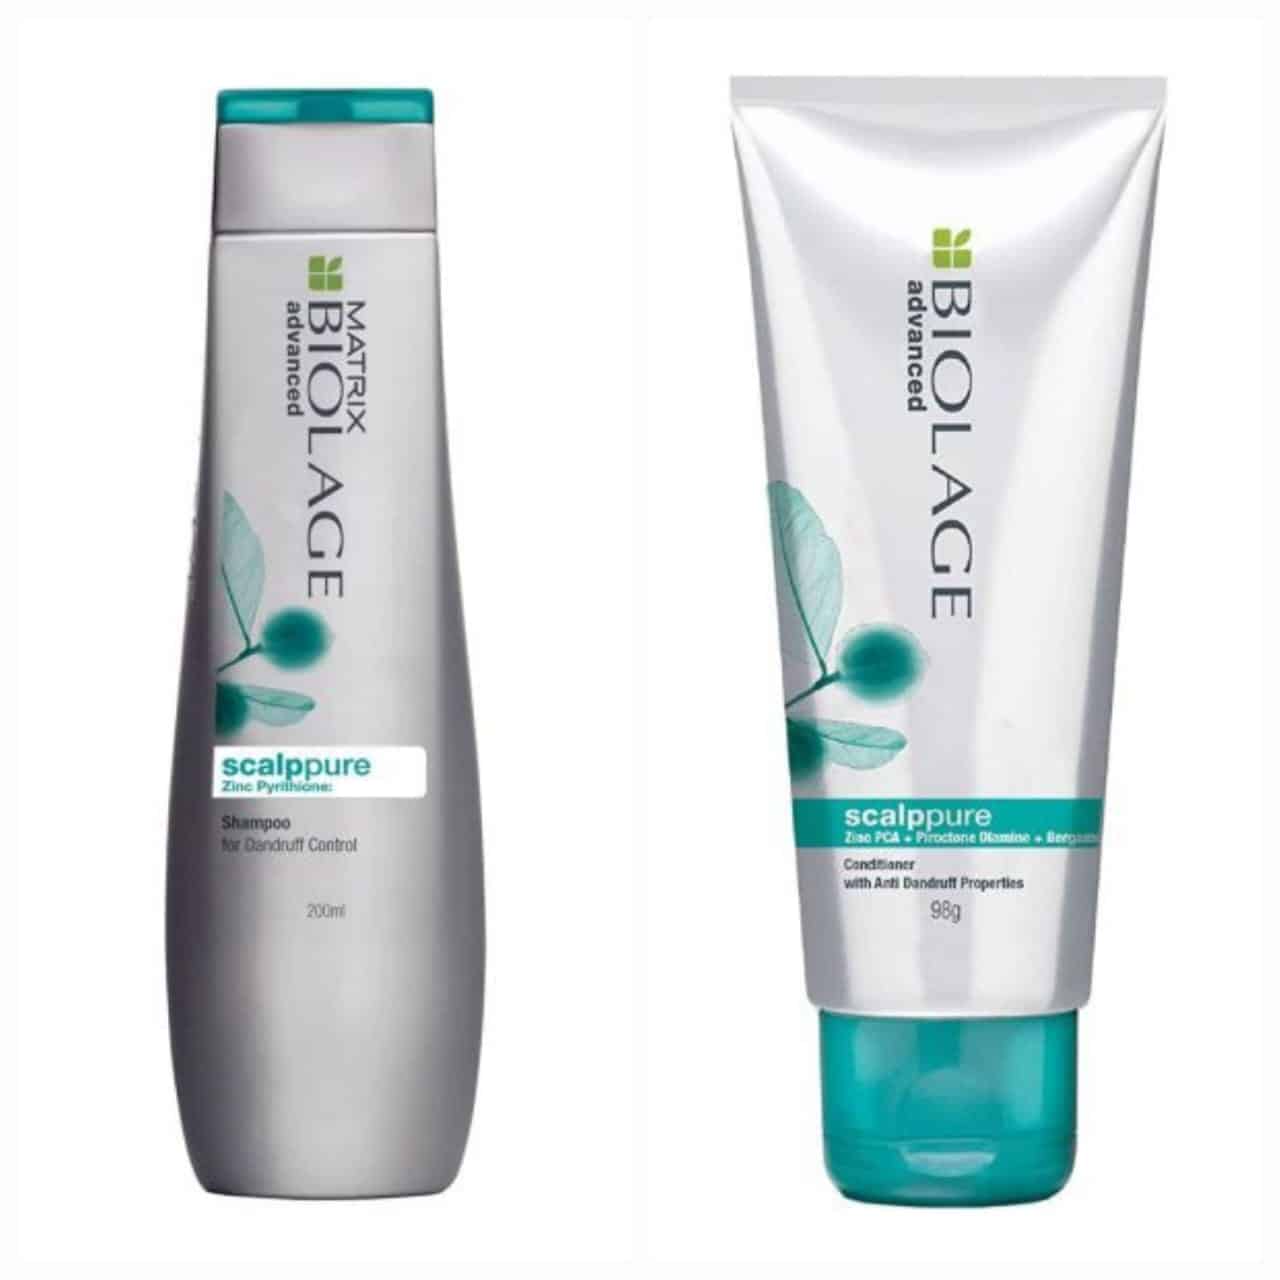 Biolage Scalppure Anti-Dandruff Shampoo and Conditioner Removes Visible Flakes After 1st Wash (200ml+98g)